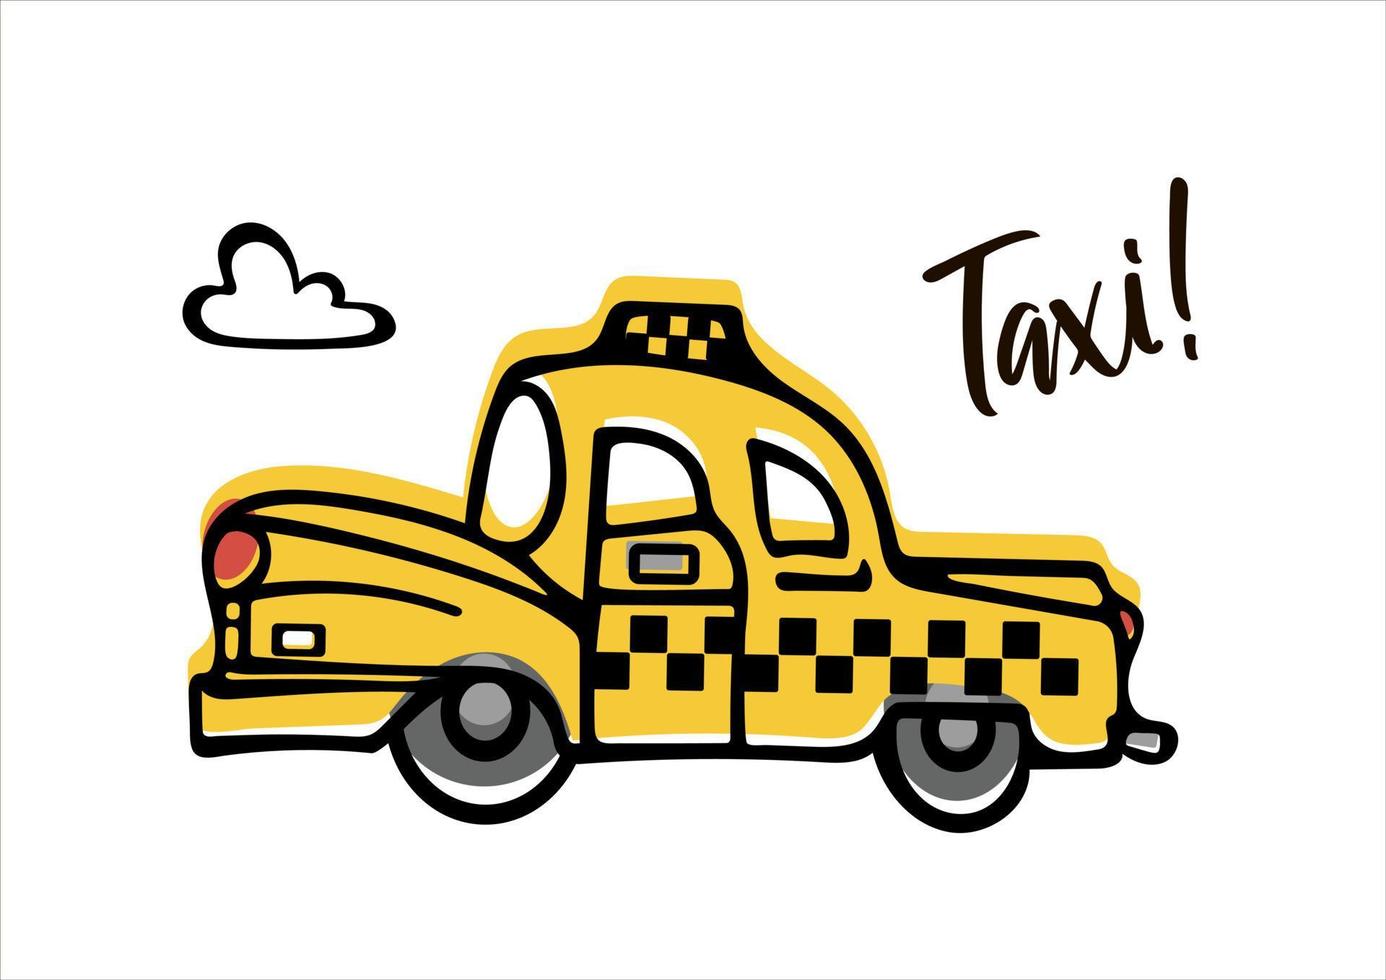 A cute retro yellow taxi car rushes along the road. Childrens illustration in doodle style. For stickers, posters, postcards, design elements. vector